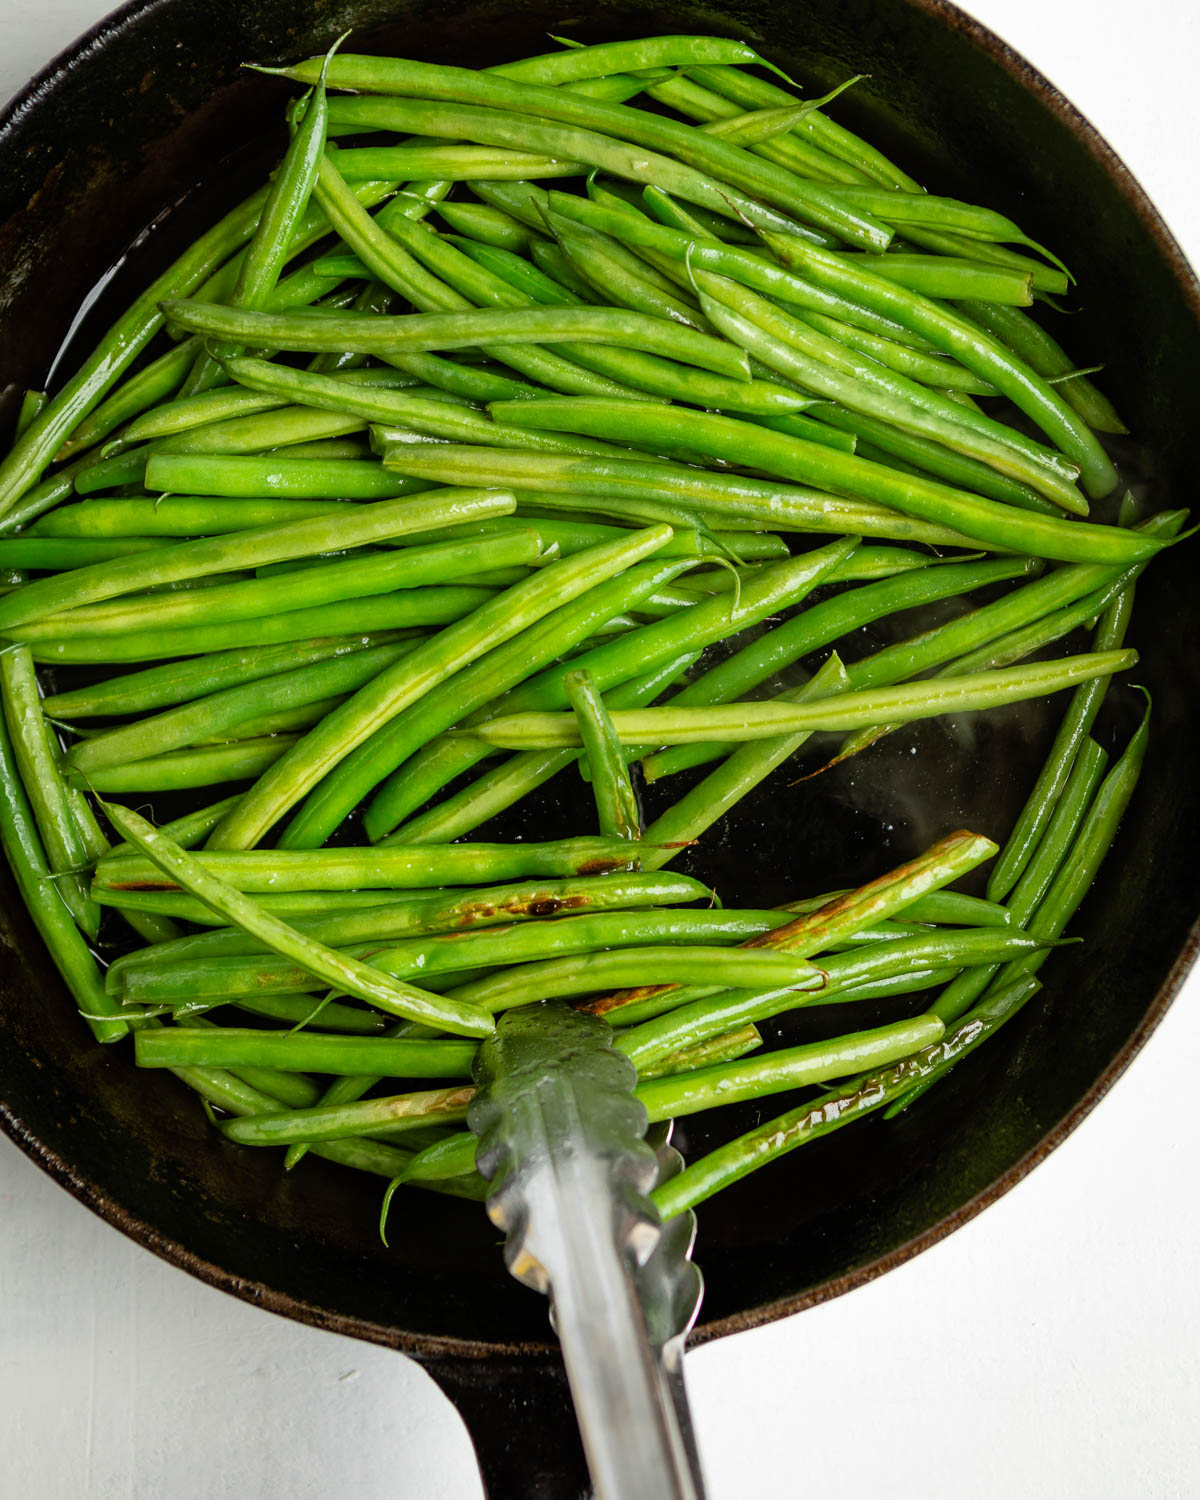 sautéed green beans in a cast iron skillet with metal tongs.